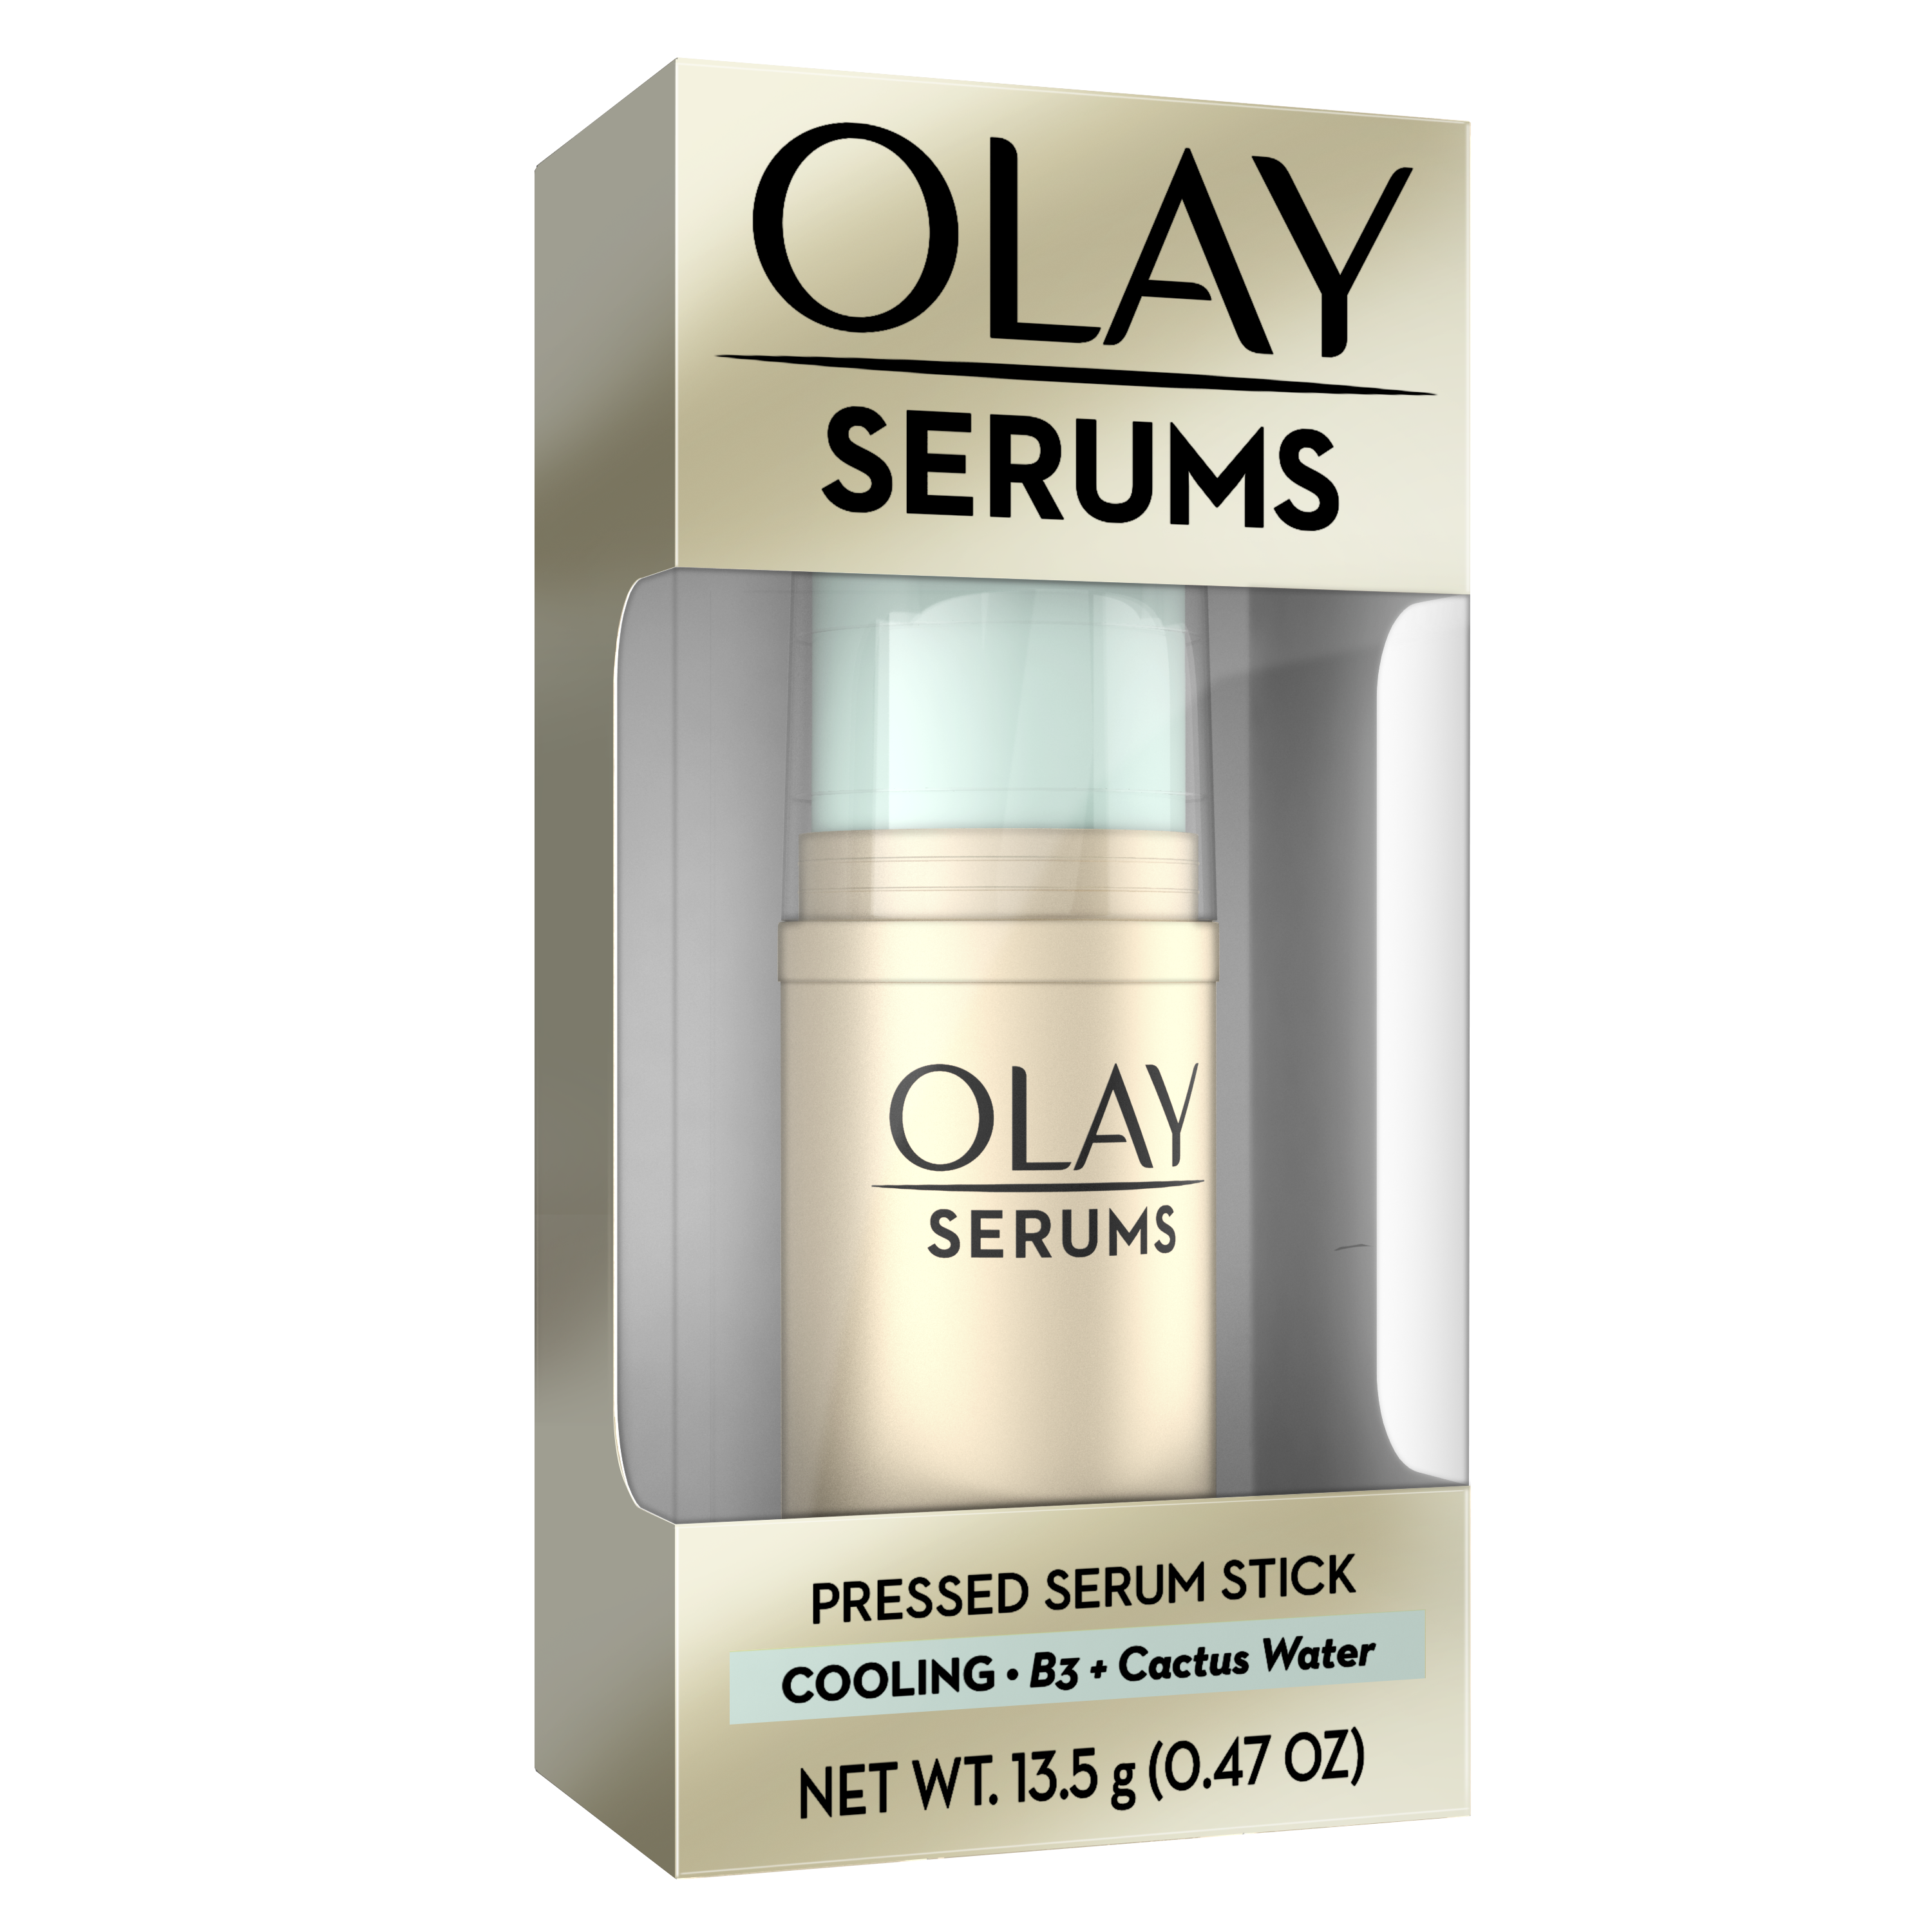 Olay Serums Pressed Serum Stick Cooling Hydration 13.5 g_2